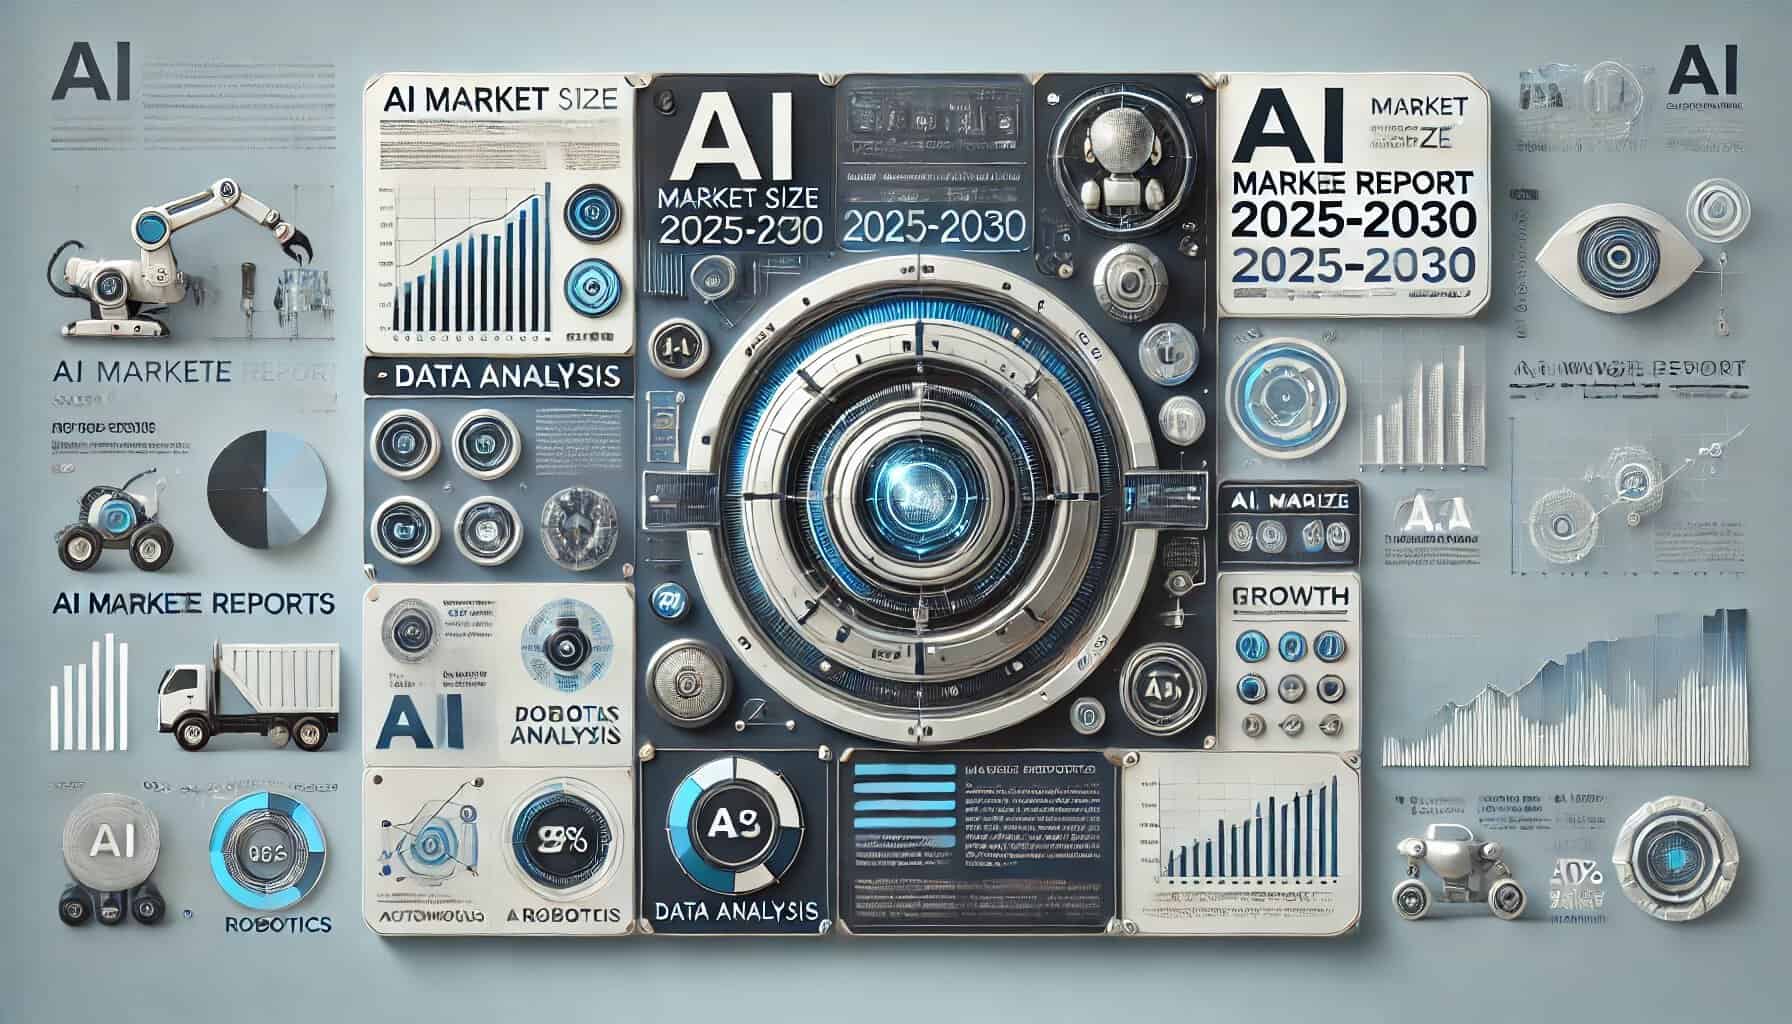 https://digital- Artificial Intelligence (AI) Market Growth and Trends: A Comprehensive Analysis 2025-2030strategy.ec.europa.eu/en/policies/ai-office#:~:text=The%20Commission%20aims%20to%20foster,of%20AI%20across%20the%20EU